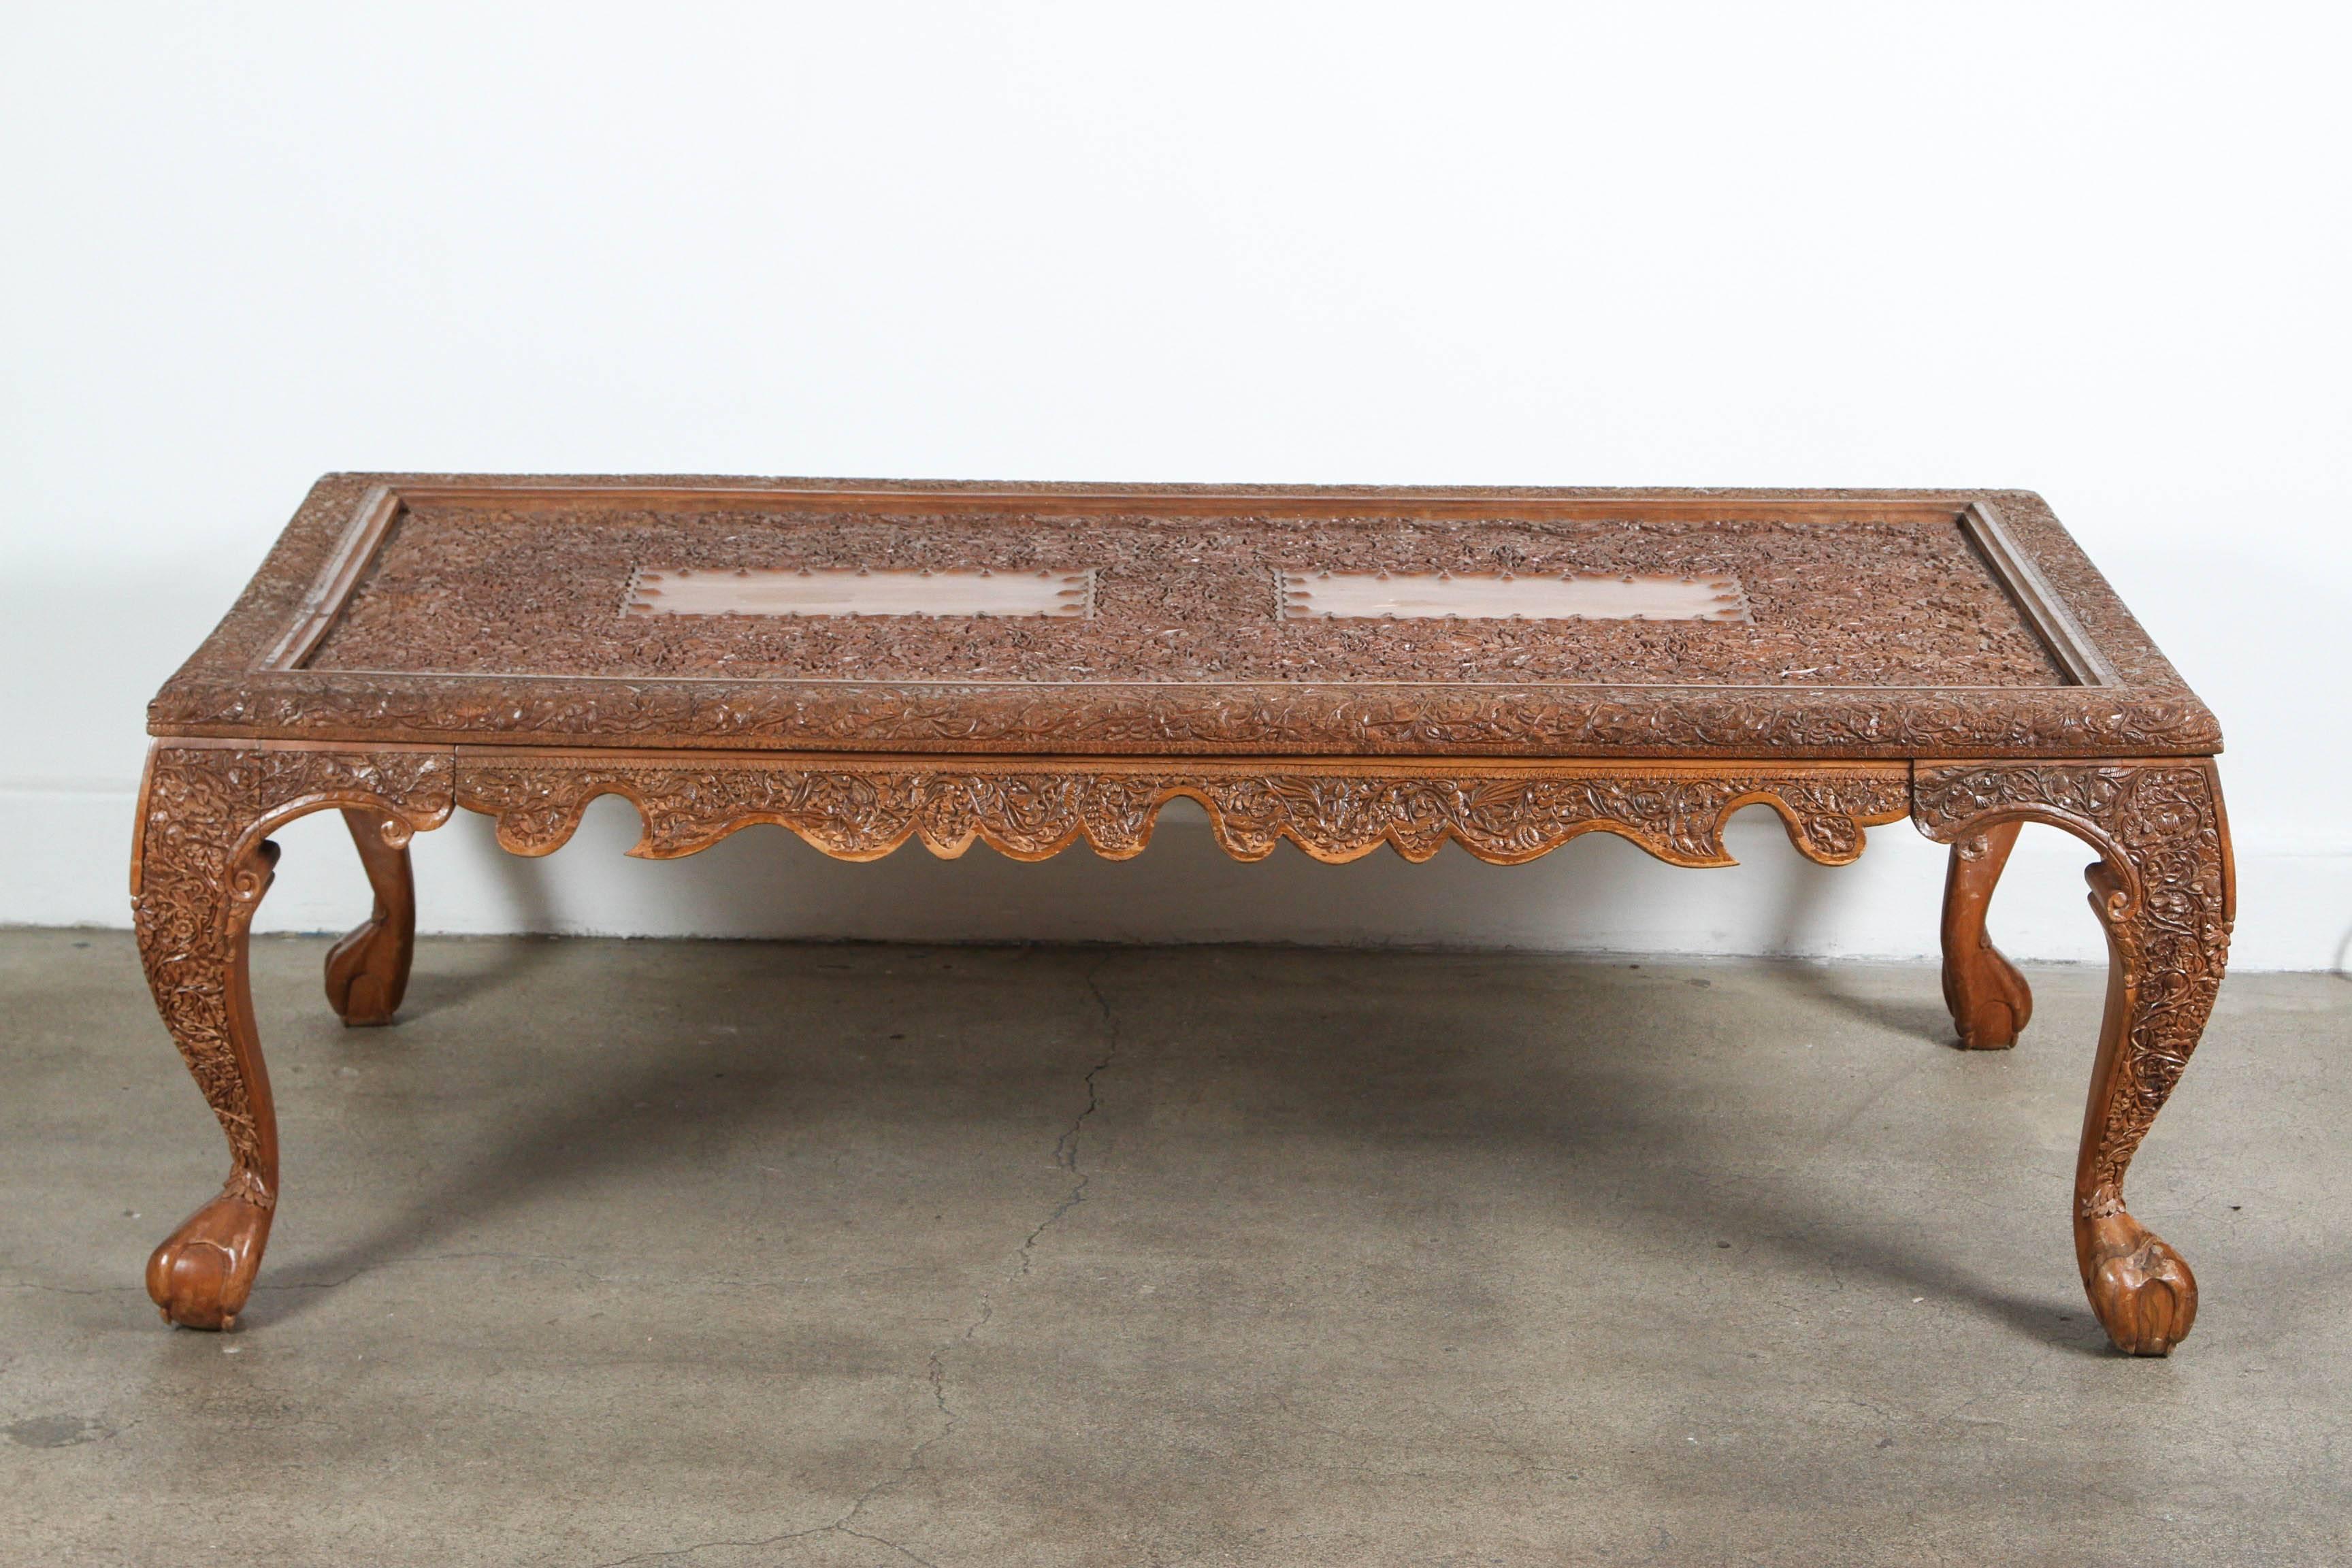 Fabulous Asian coffee table, great quality and very fine hand carved wood.
Rectangular Asian wood coffee table with very interesting art work, Asian royal furniture.
Balinese Art and Crafts, Asian folk Art, Indonesia or Burmese style.
Dimensions: